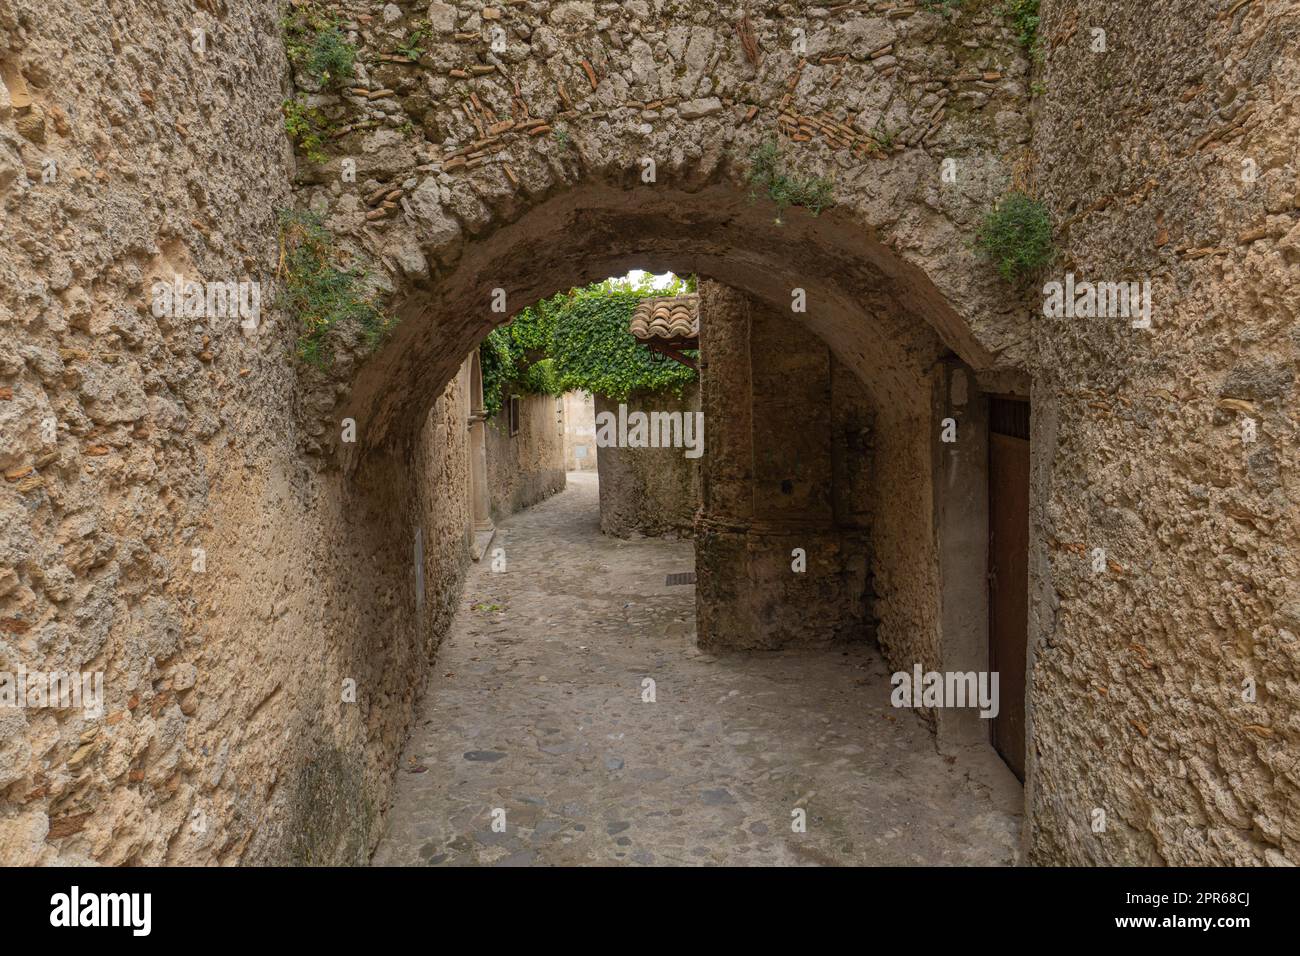 Stone walls with a round arch in a village Stock Photo